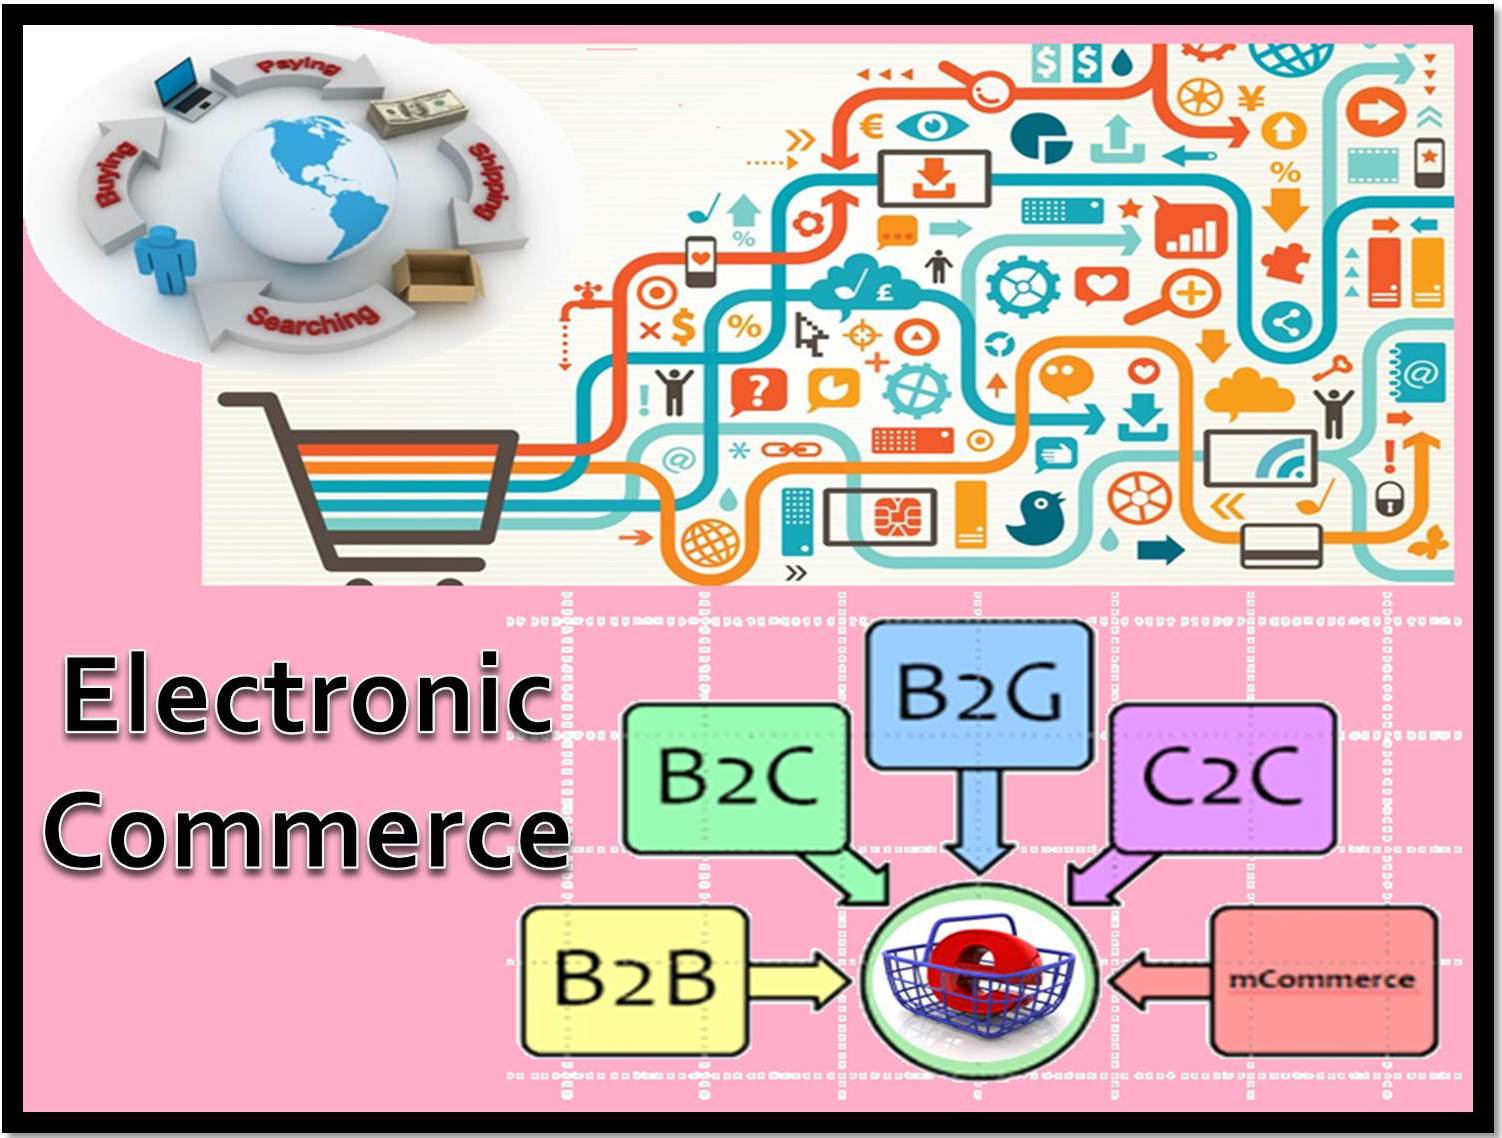 http://study.aisectonline.com/images/Electronic Commerce.jpg